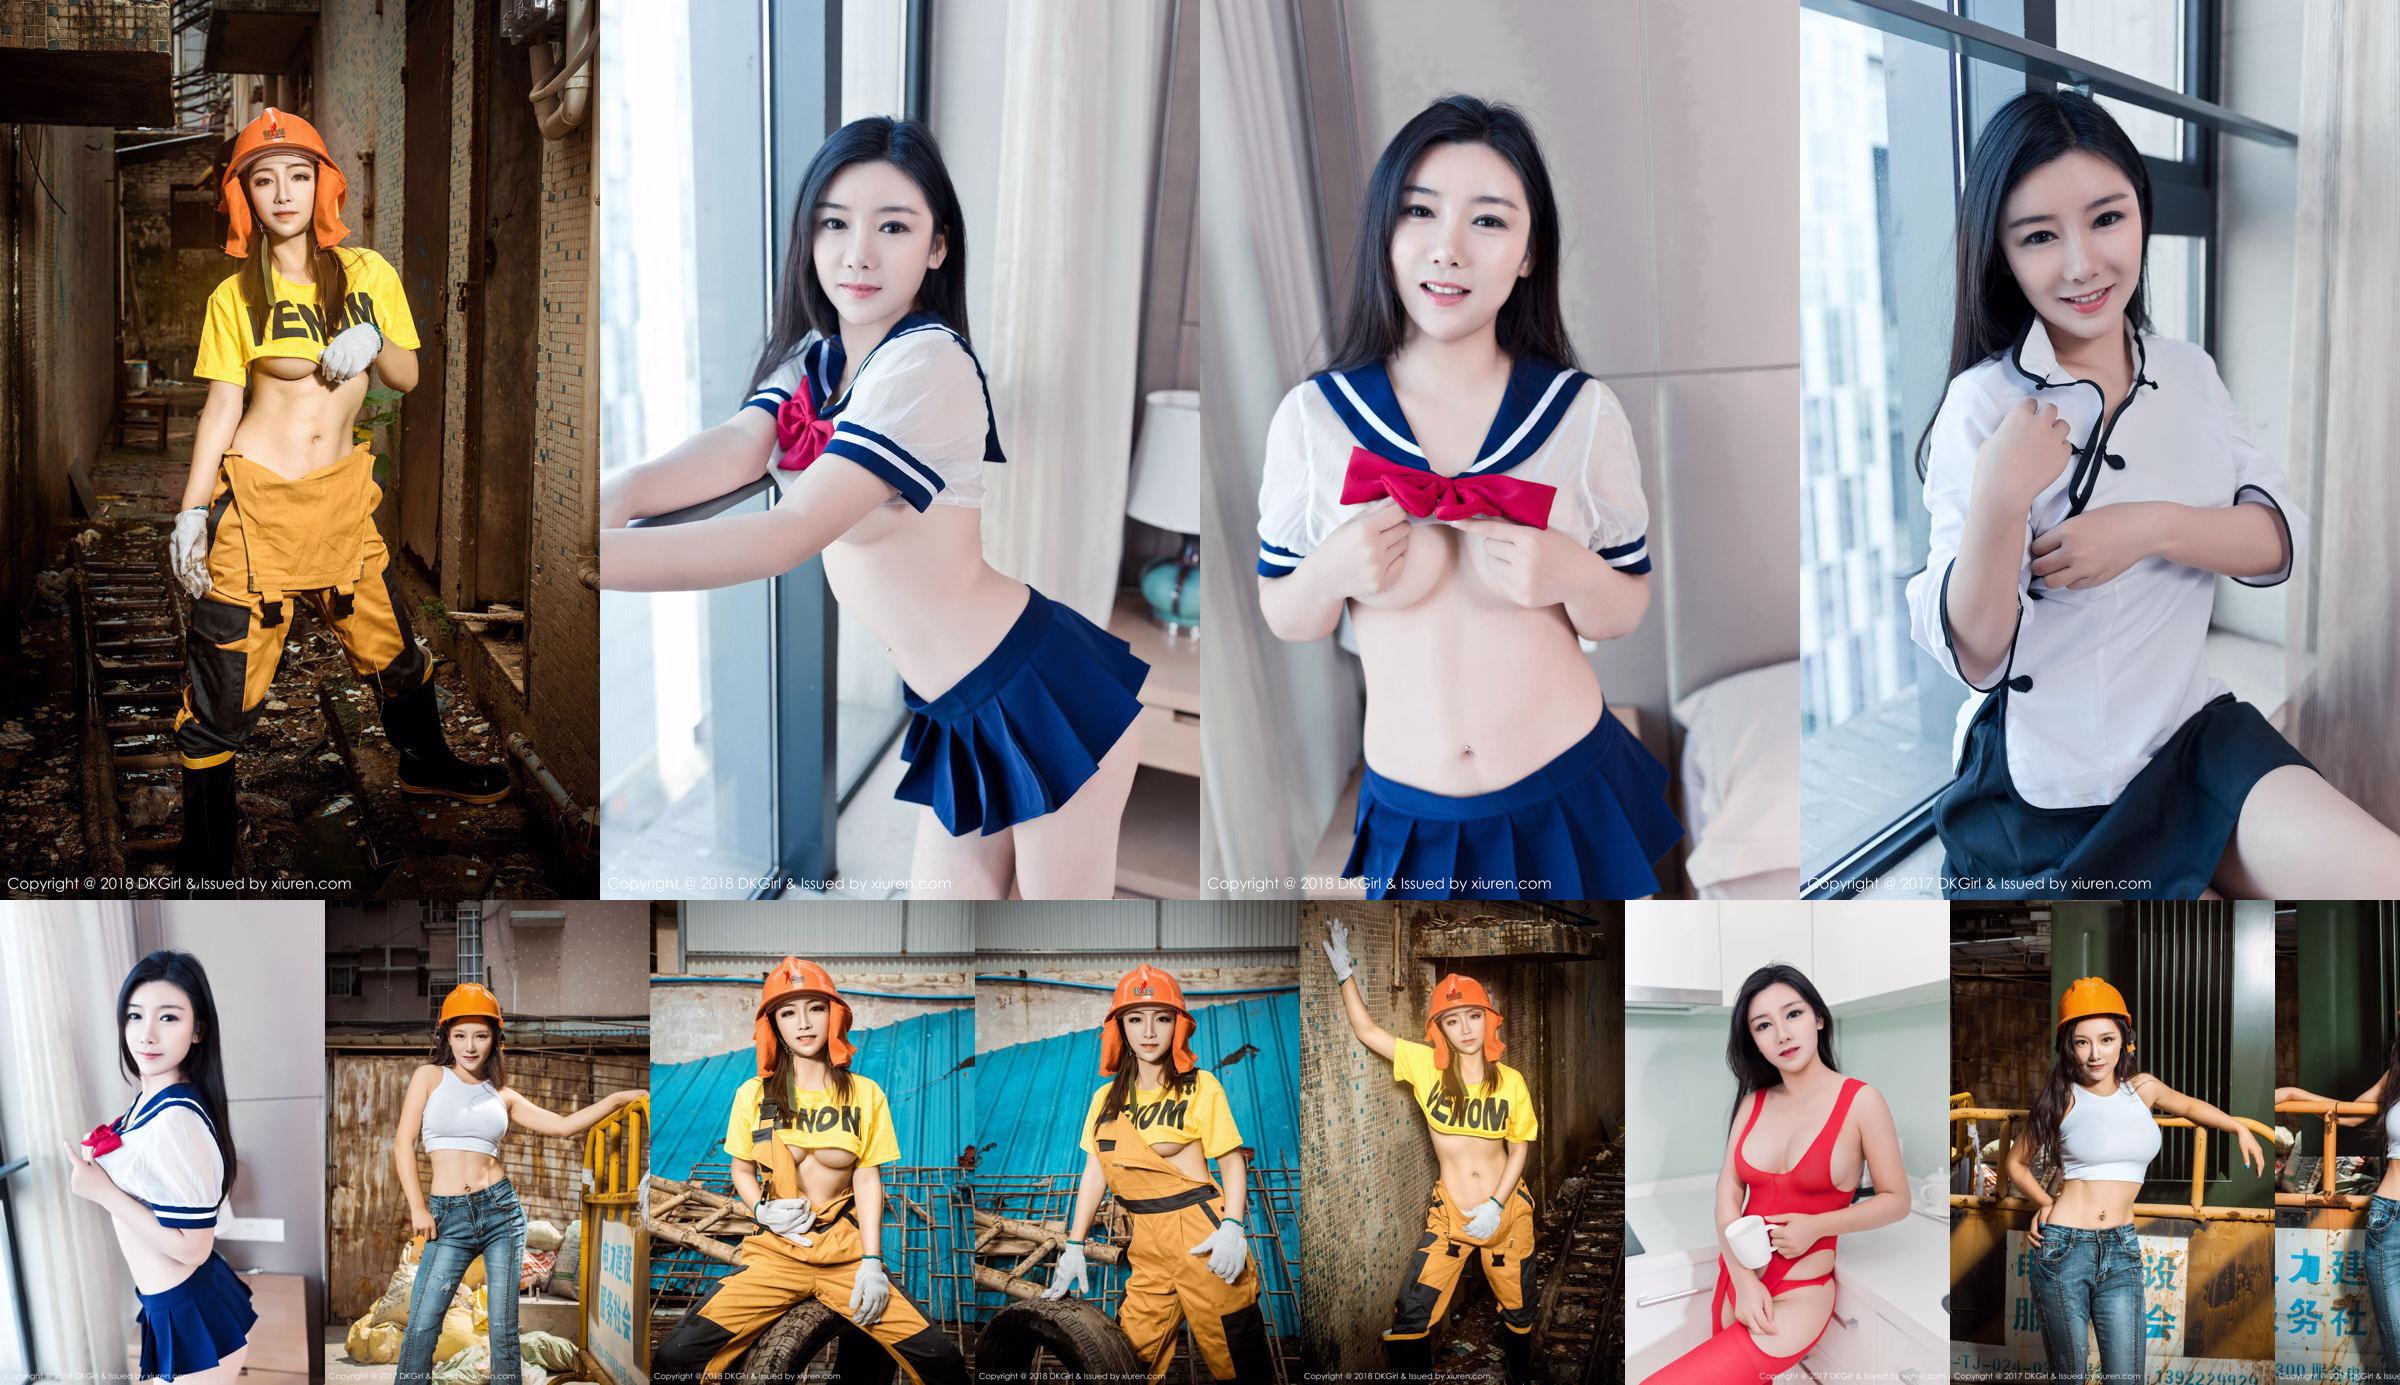 Yuanmei "Working Outfits Sexy and Wild" [DKGirl] Vol.077 No.ab02ca หน้า 1